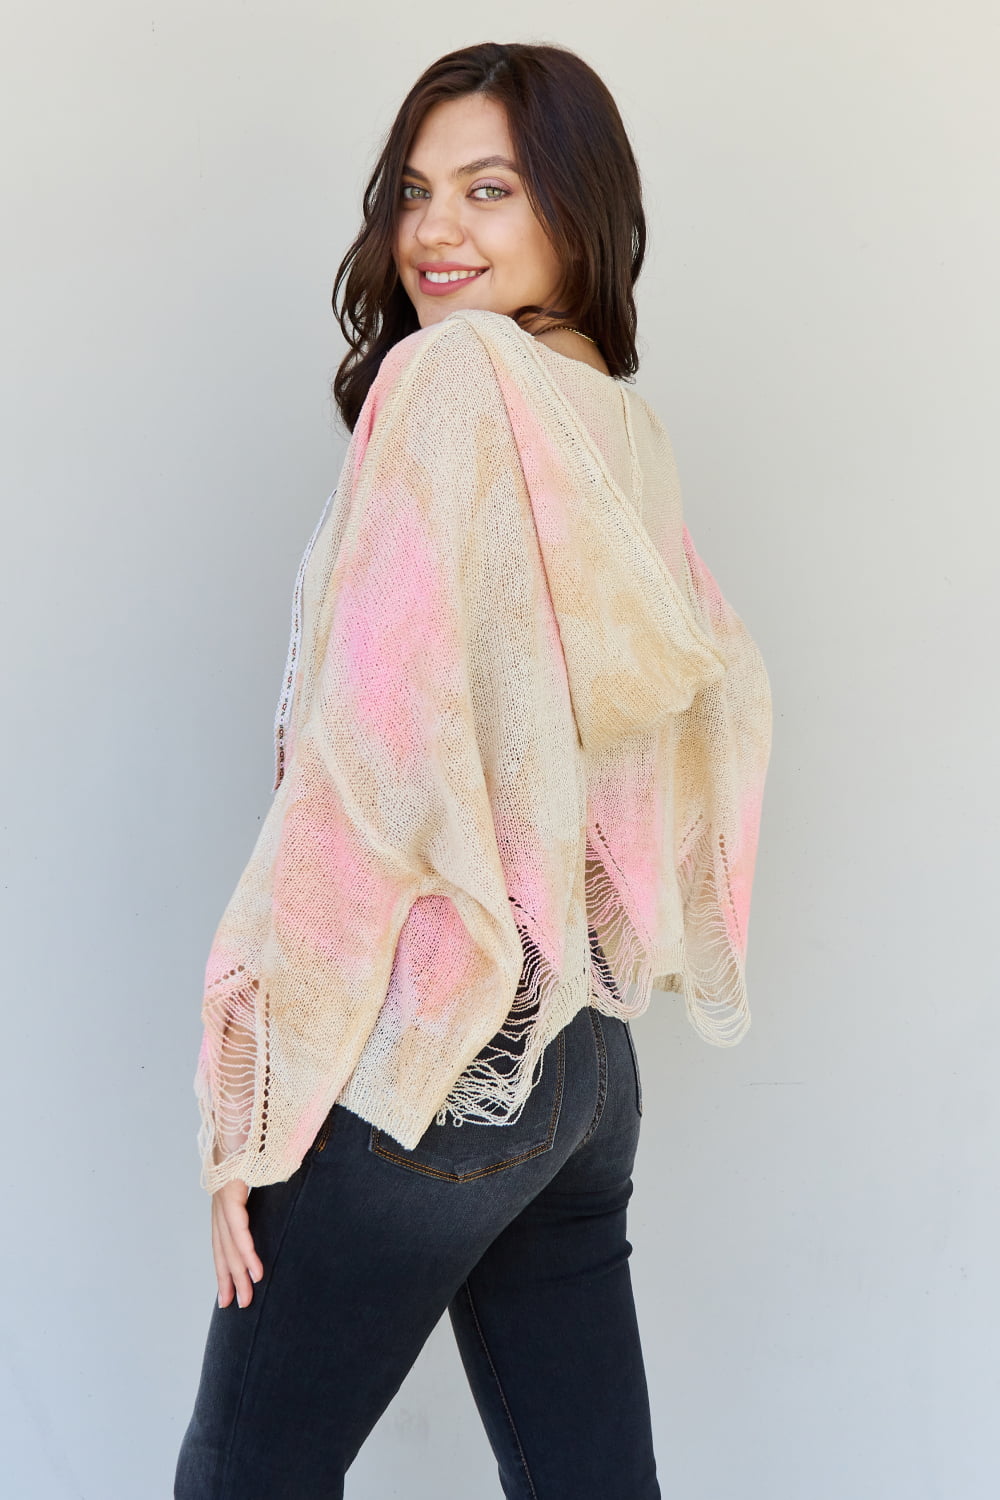 POL Mix It Up Tie Dye Hooded Distressed Sweater in Ivory/Pink